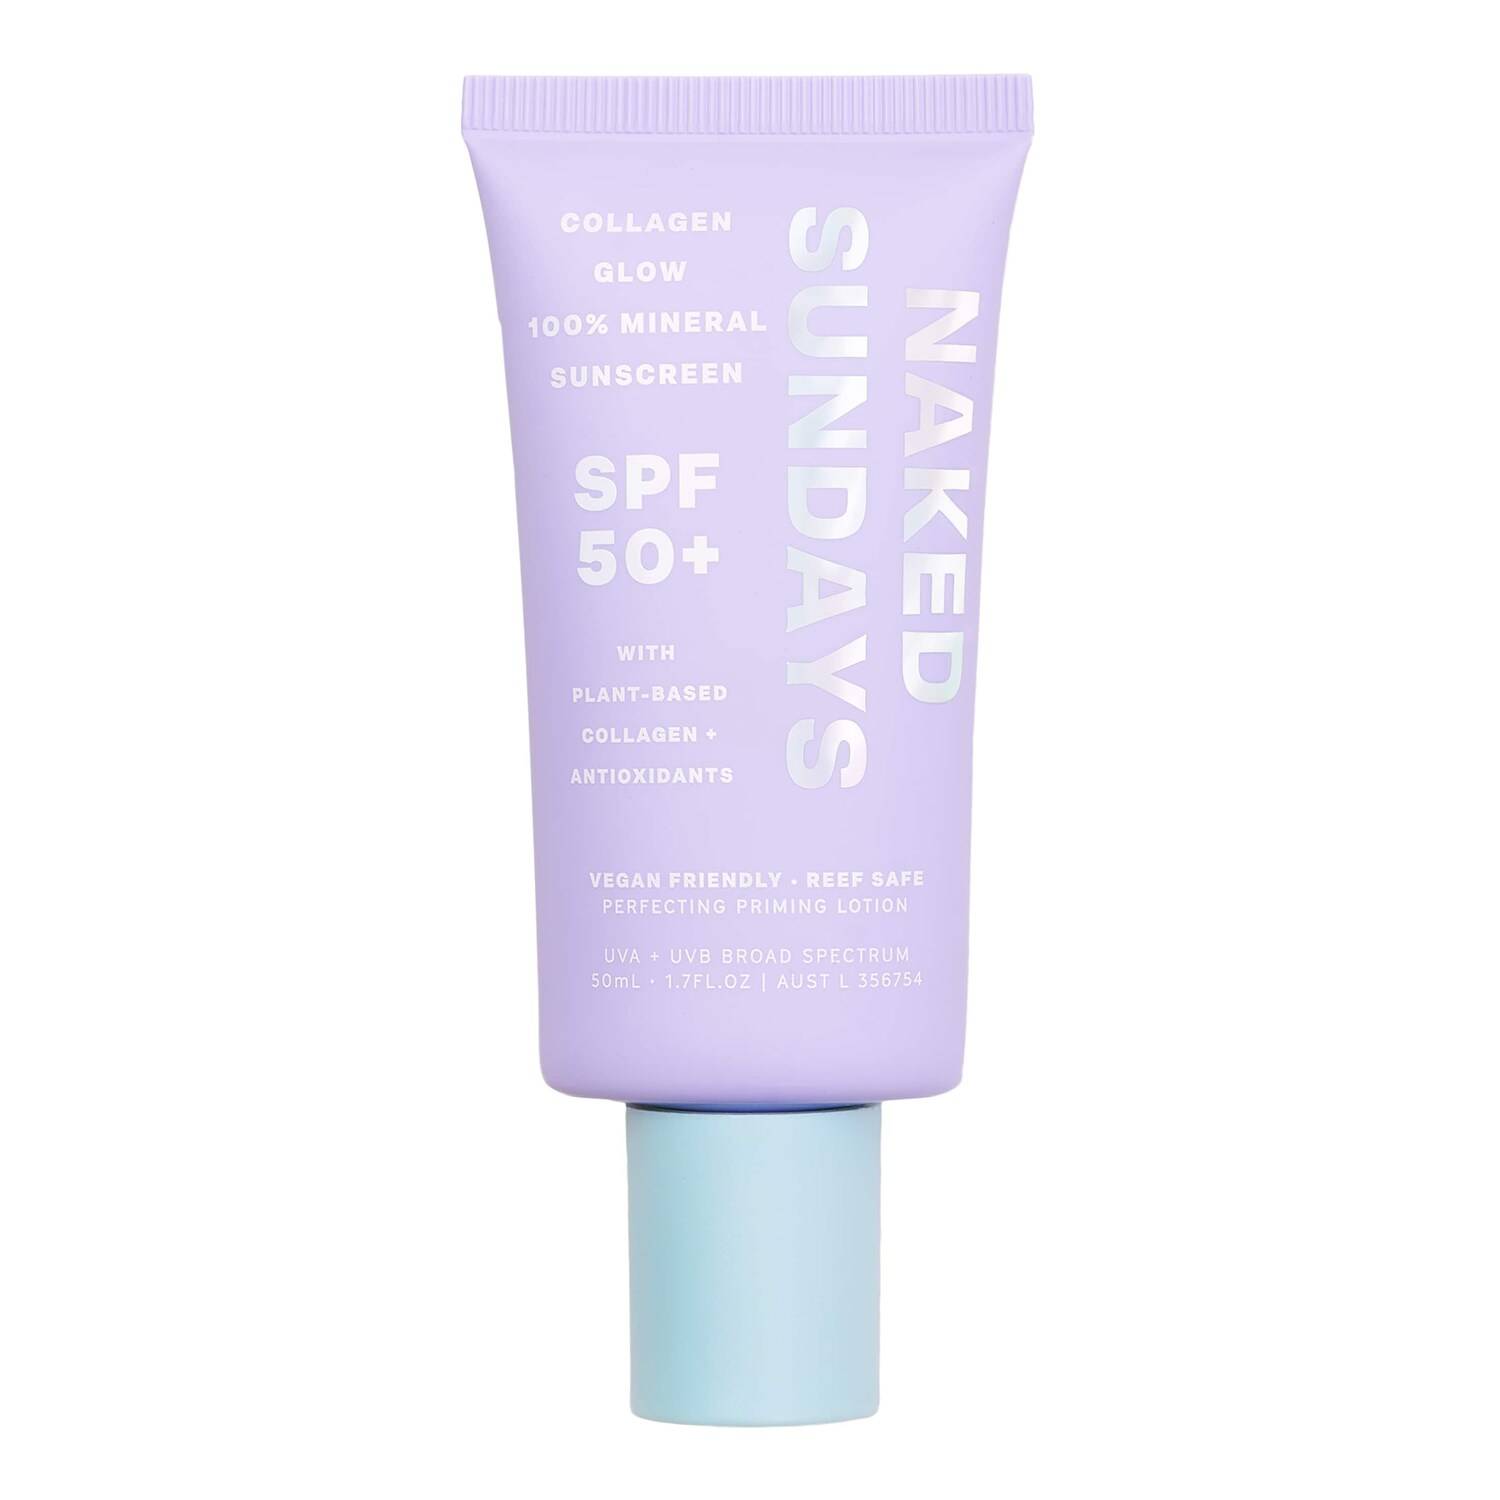 Naked Sundays Spf50+ Collagen Glow 100% Mineral Priming Perfecting Lotion 50ml